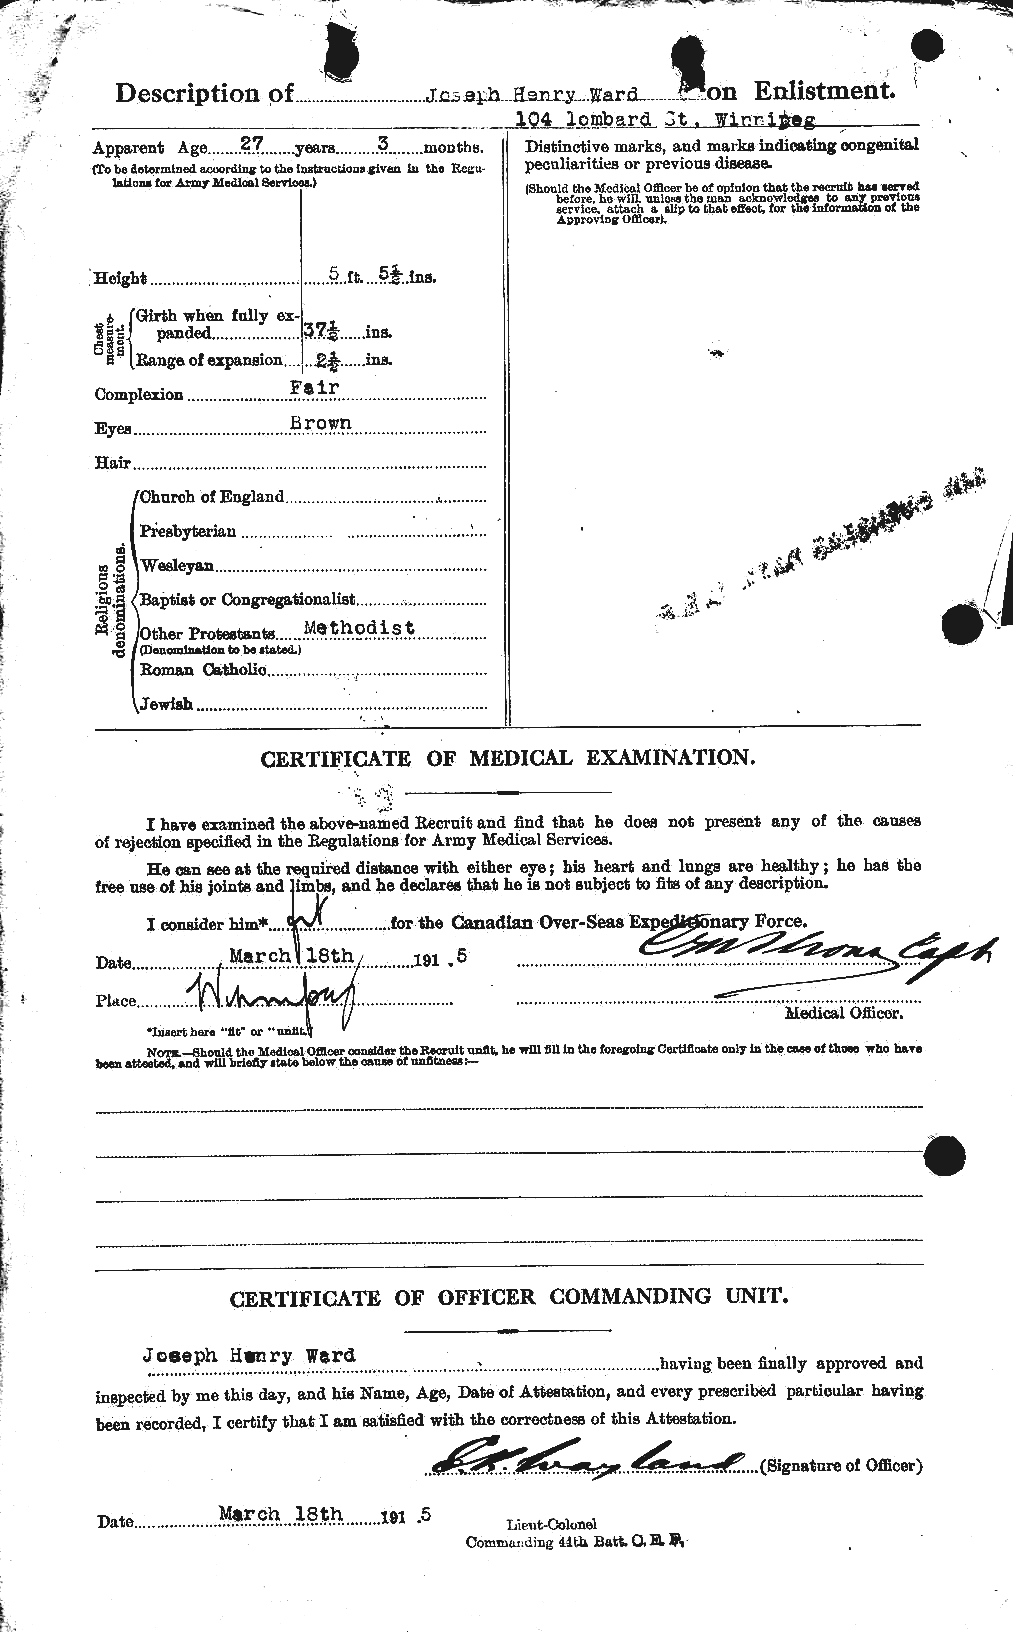 Personnel Records of the First World War - CEF 659567b